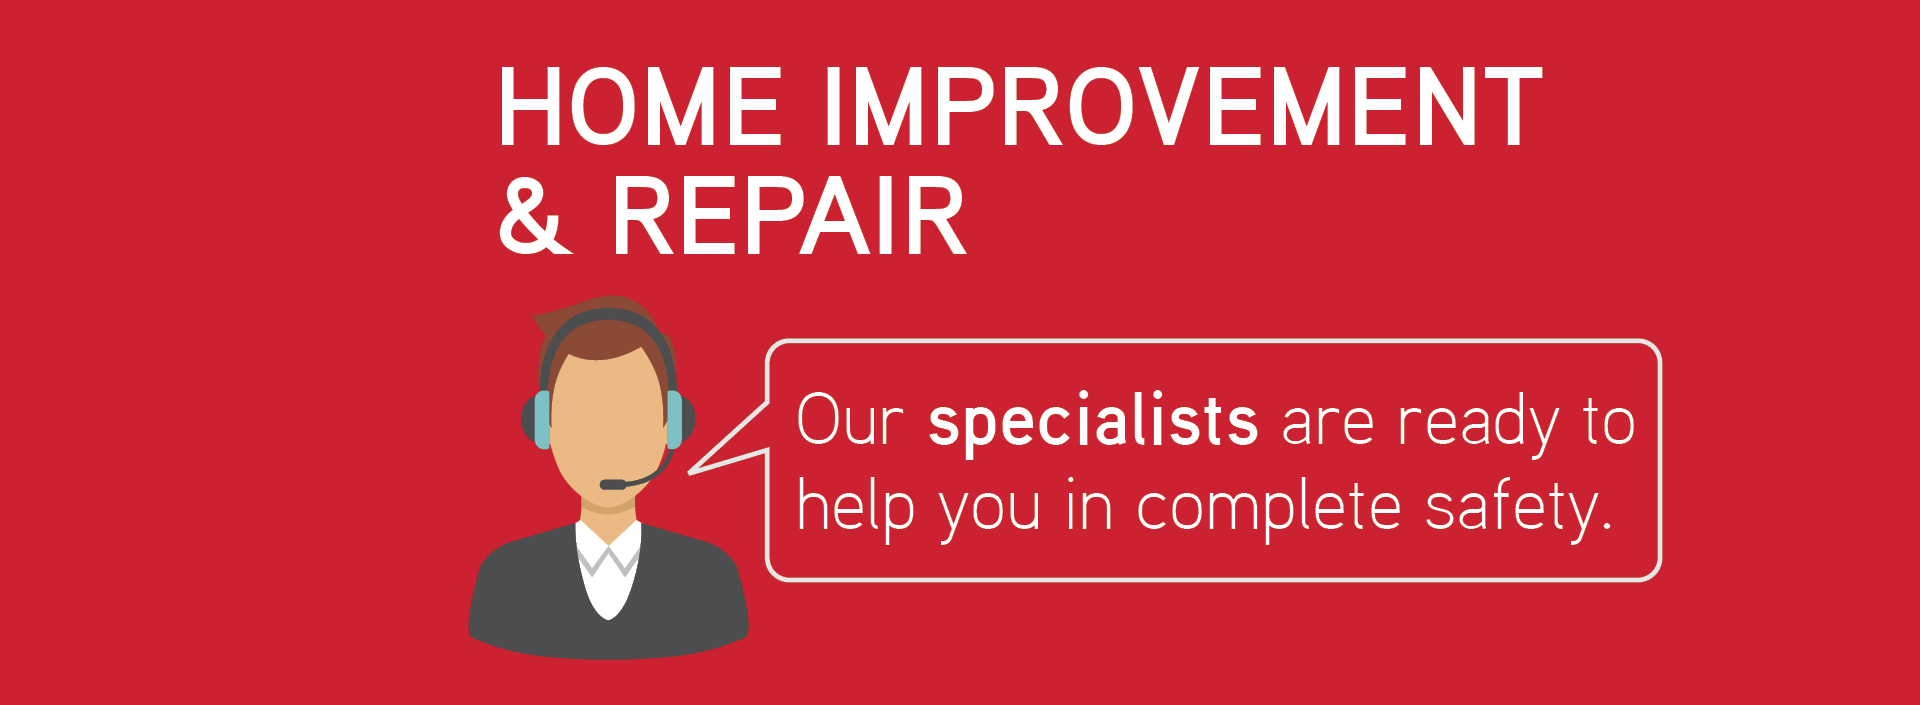 Home improvement & repair. Our specialists are ready to help you in complete safety.